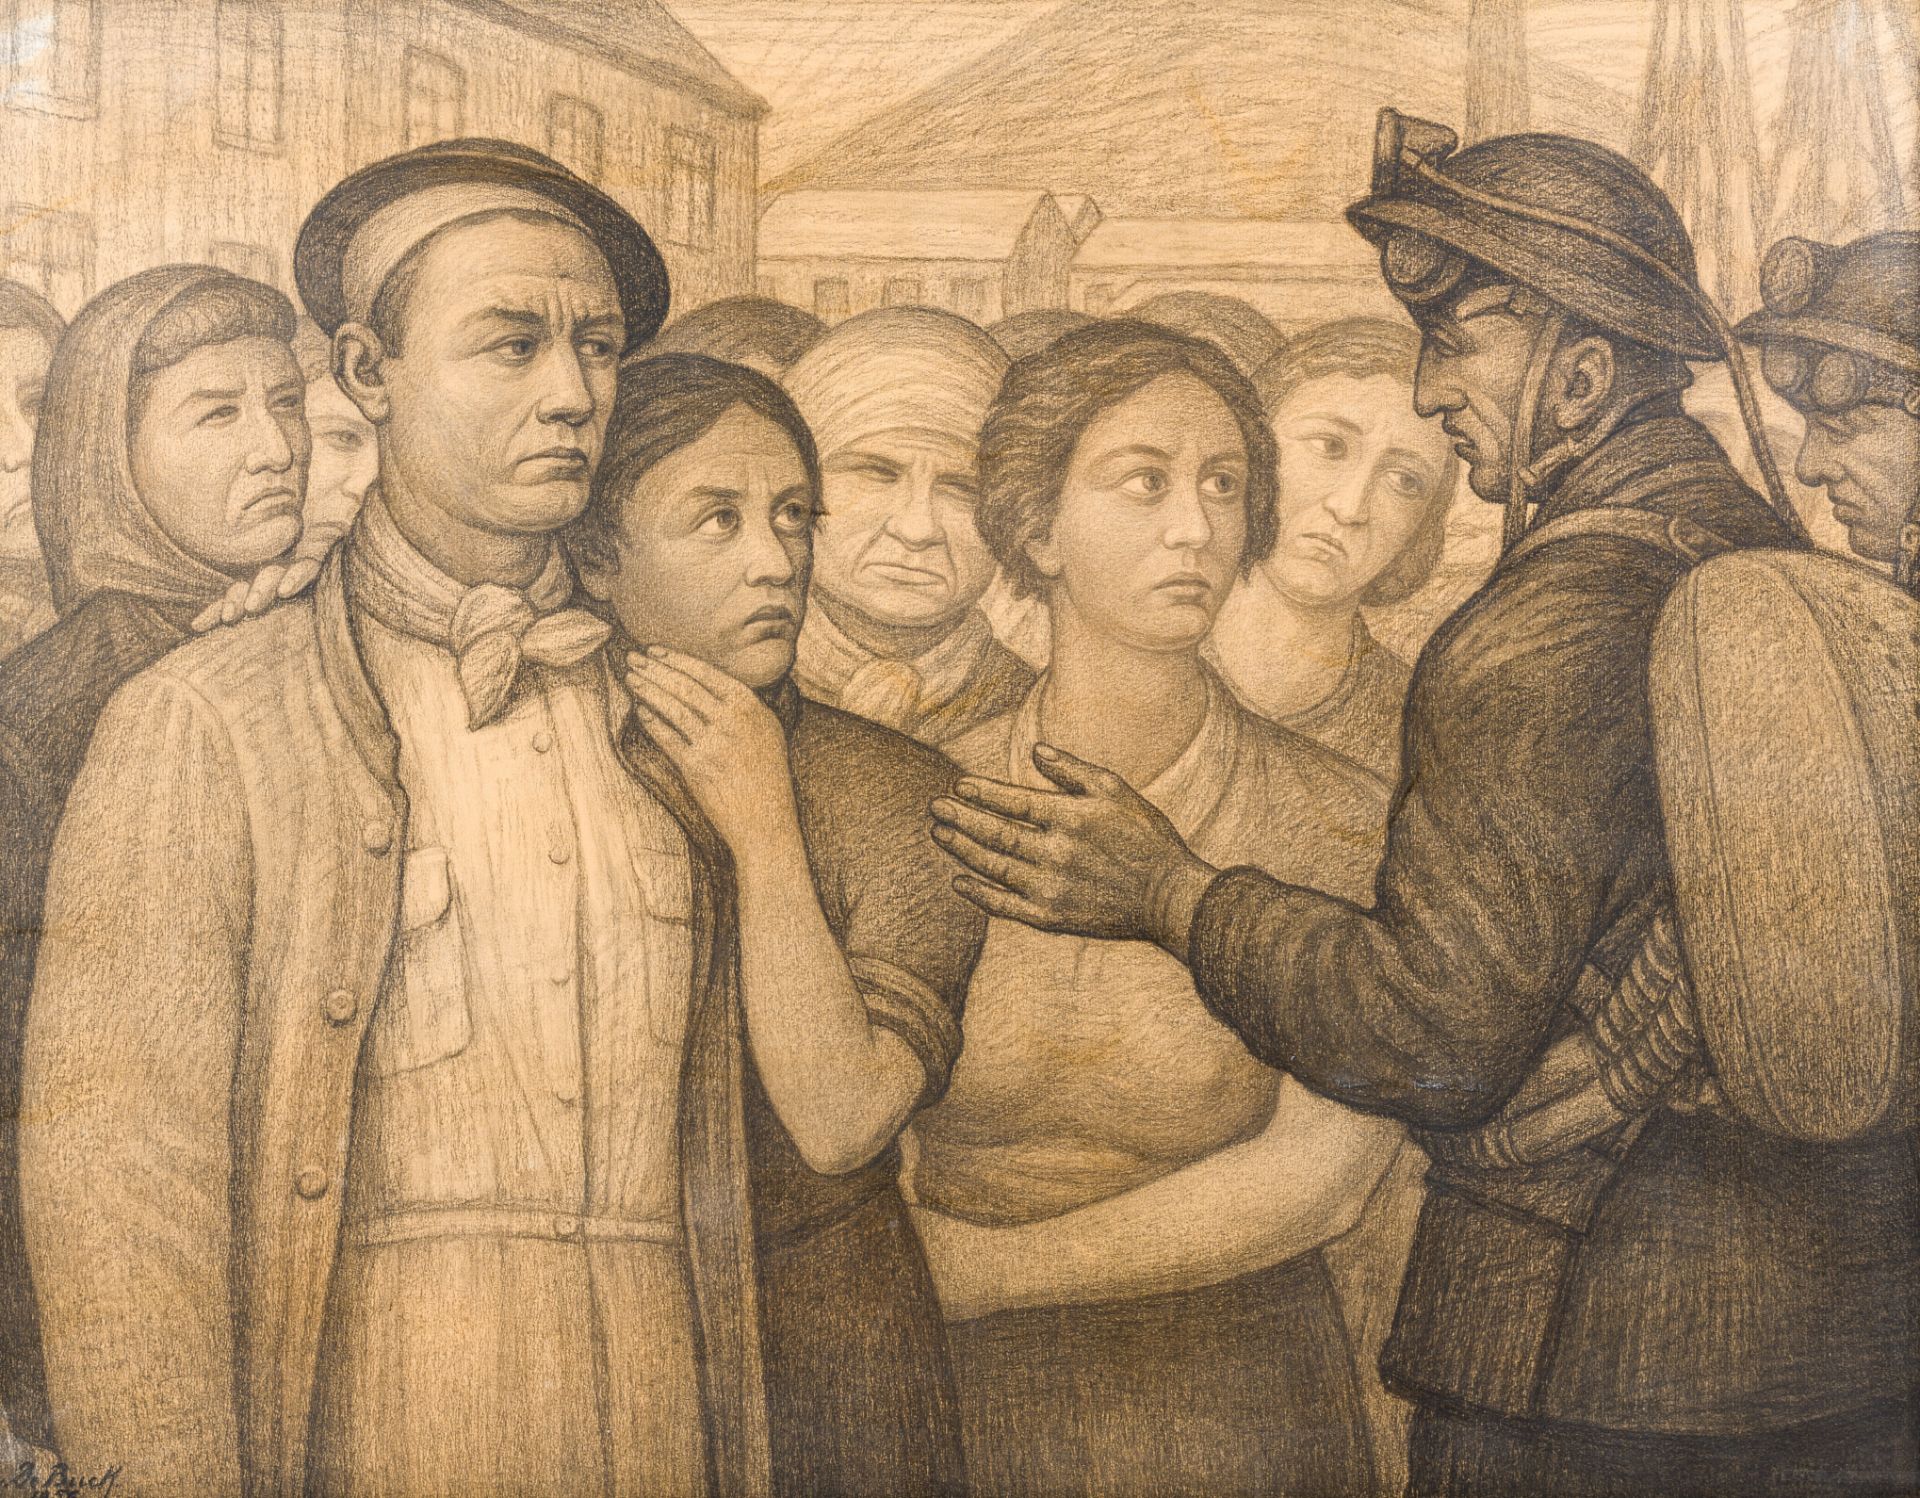 Evariste Gustave De Buck (1892-1974): The Marcinelle mining disaster, charcoal on paper, dated 1956